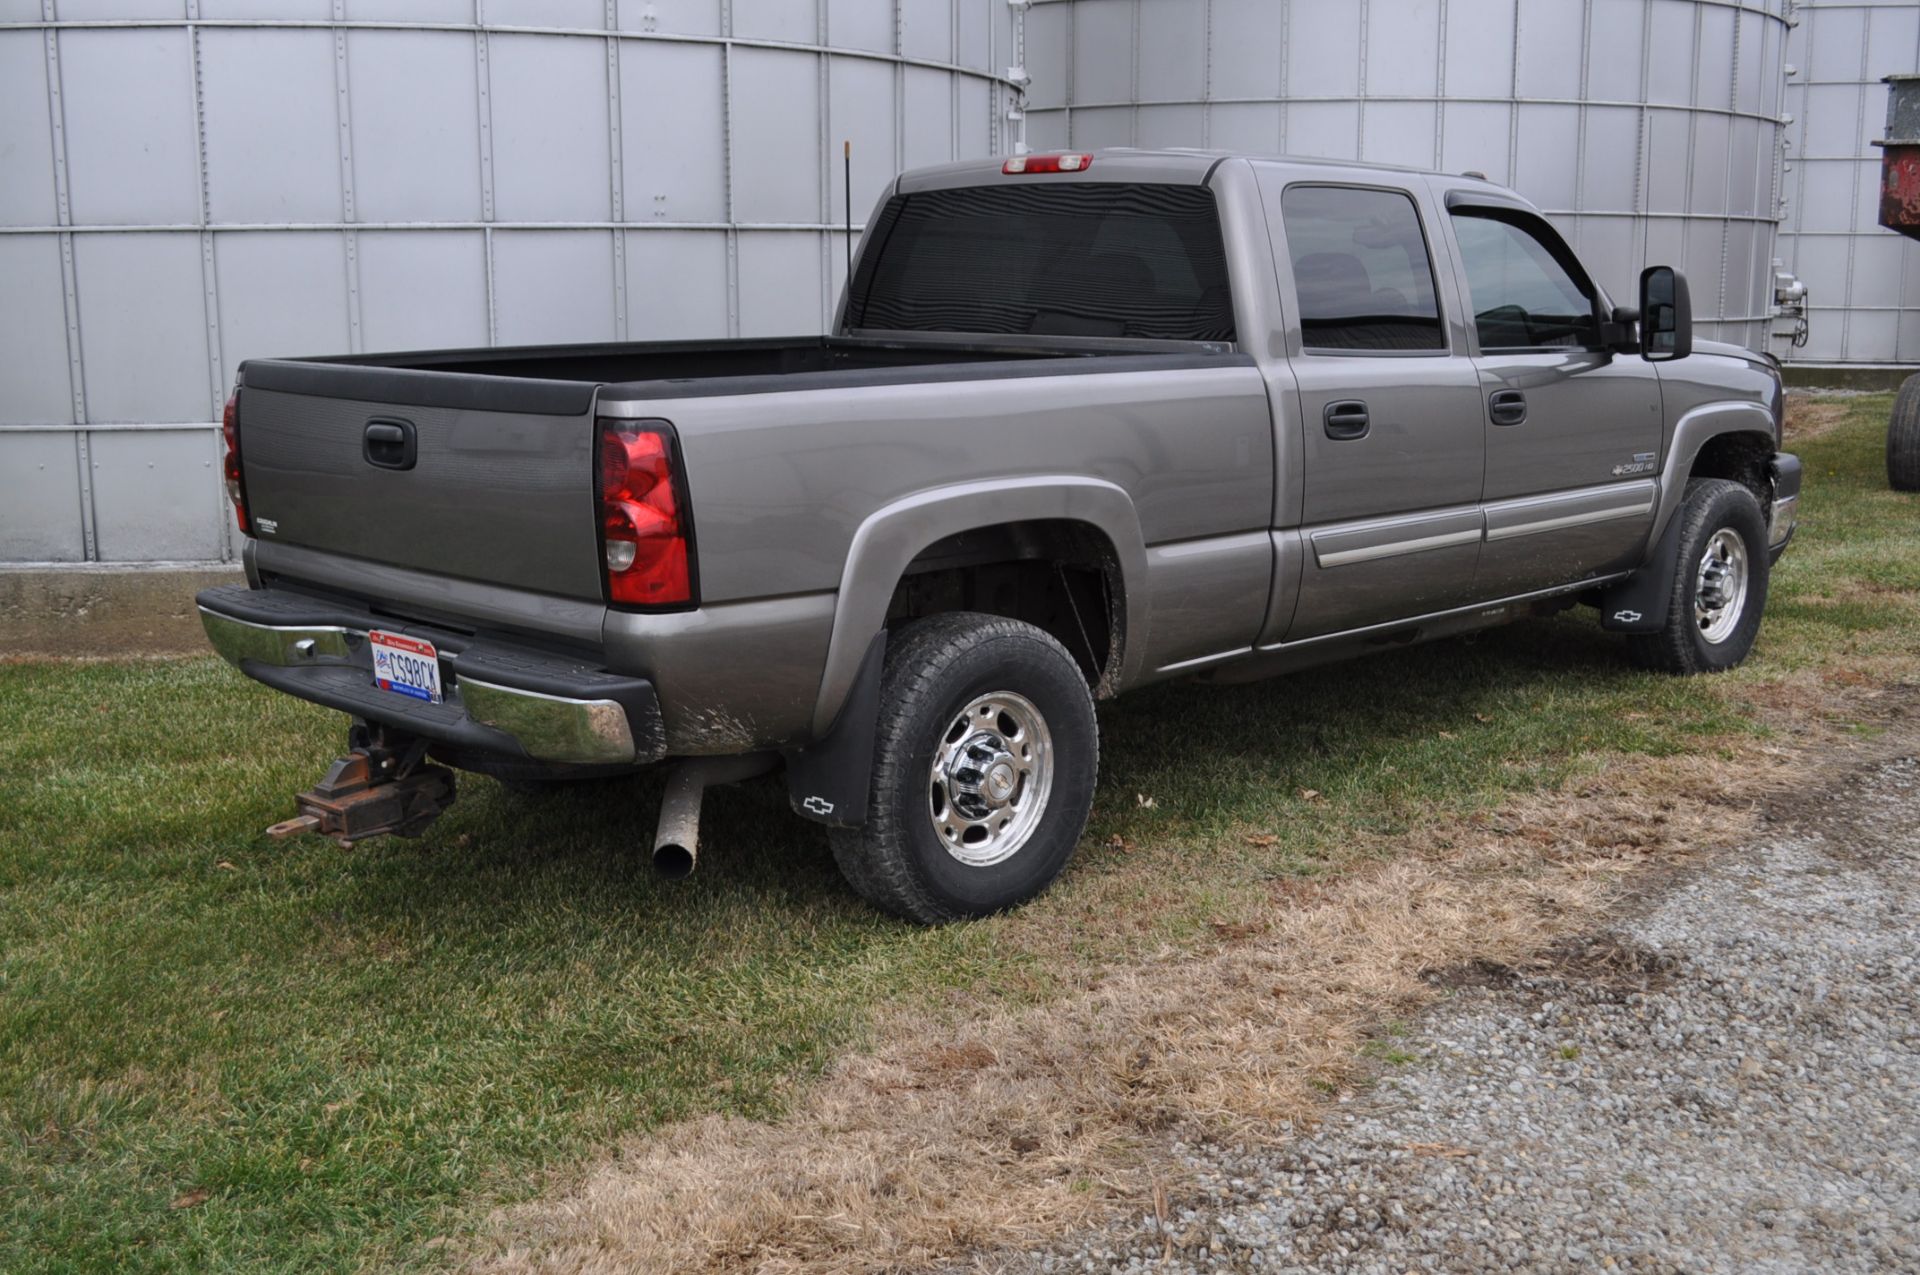 2006 Chevy 2500 HD Duramax pick-up truck, 4x4, short bed, auto, cloth interior, Rhino bed liner, B & - Image 3 of 20